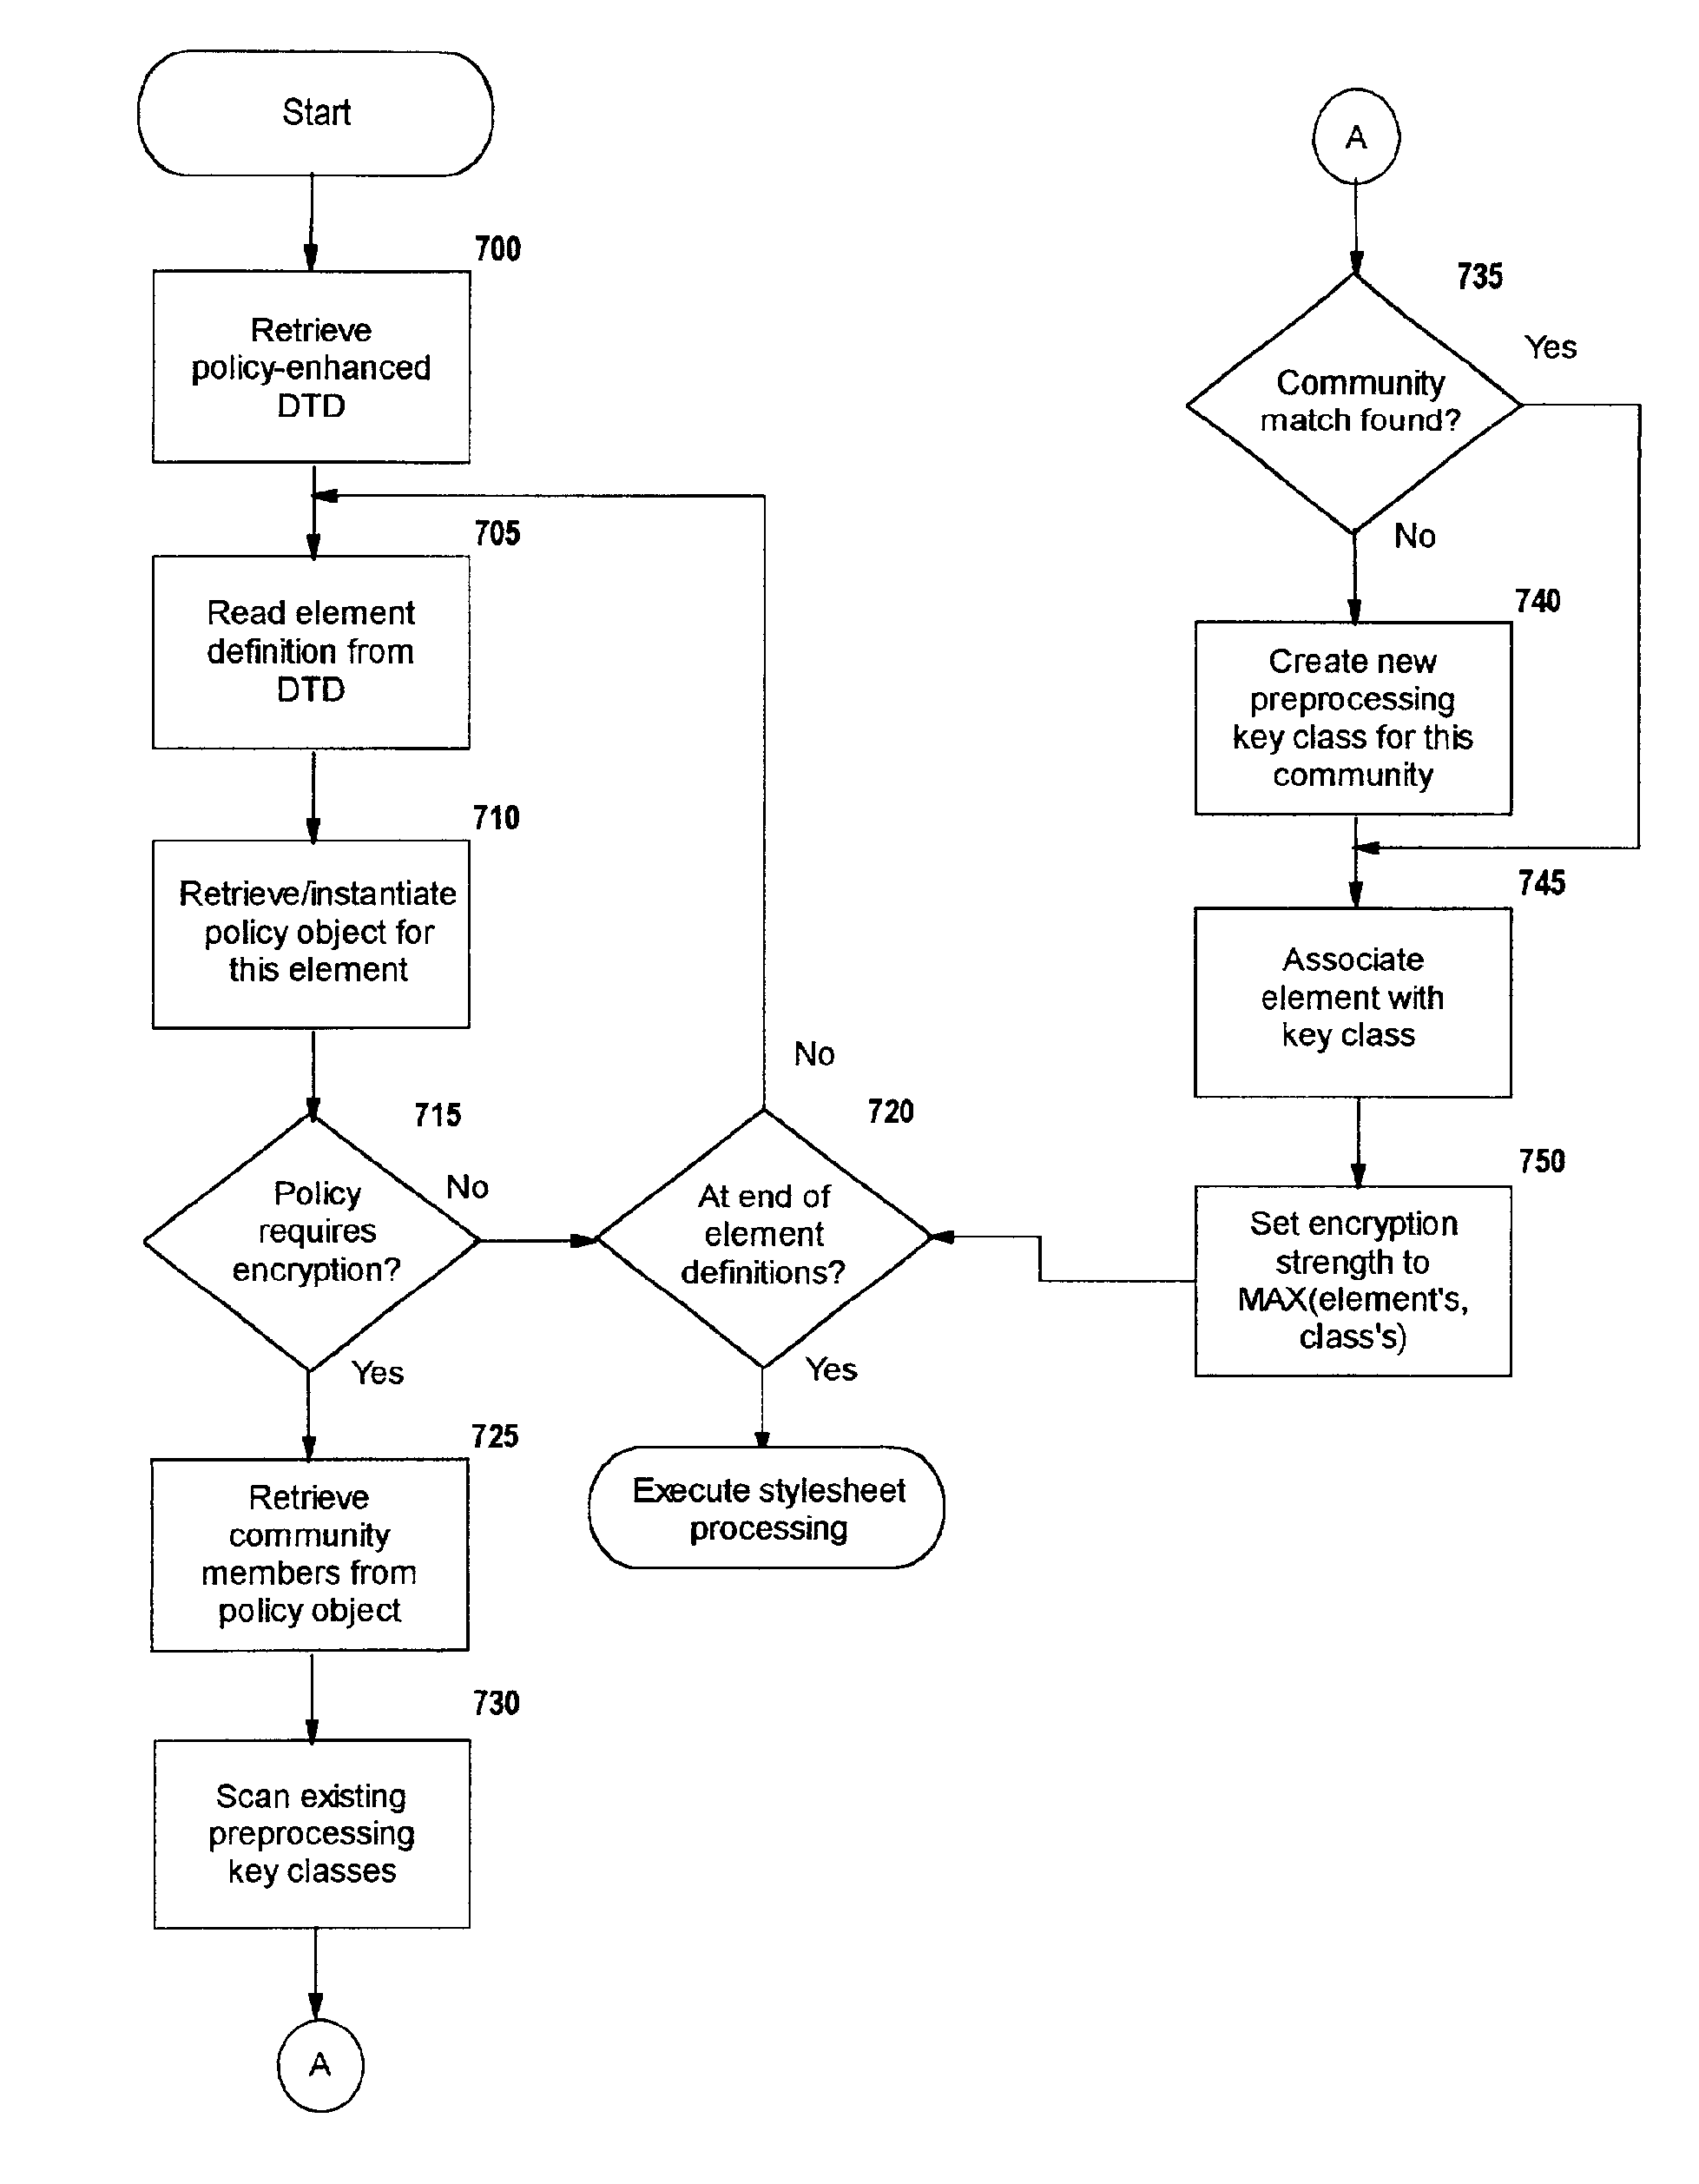 Selective data encryption using style sheet processing for decryption by a group clerk